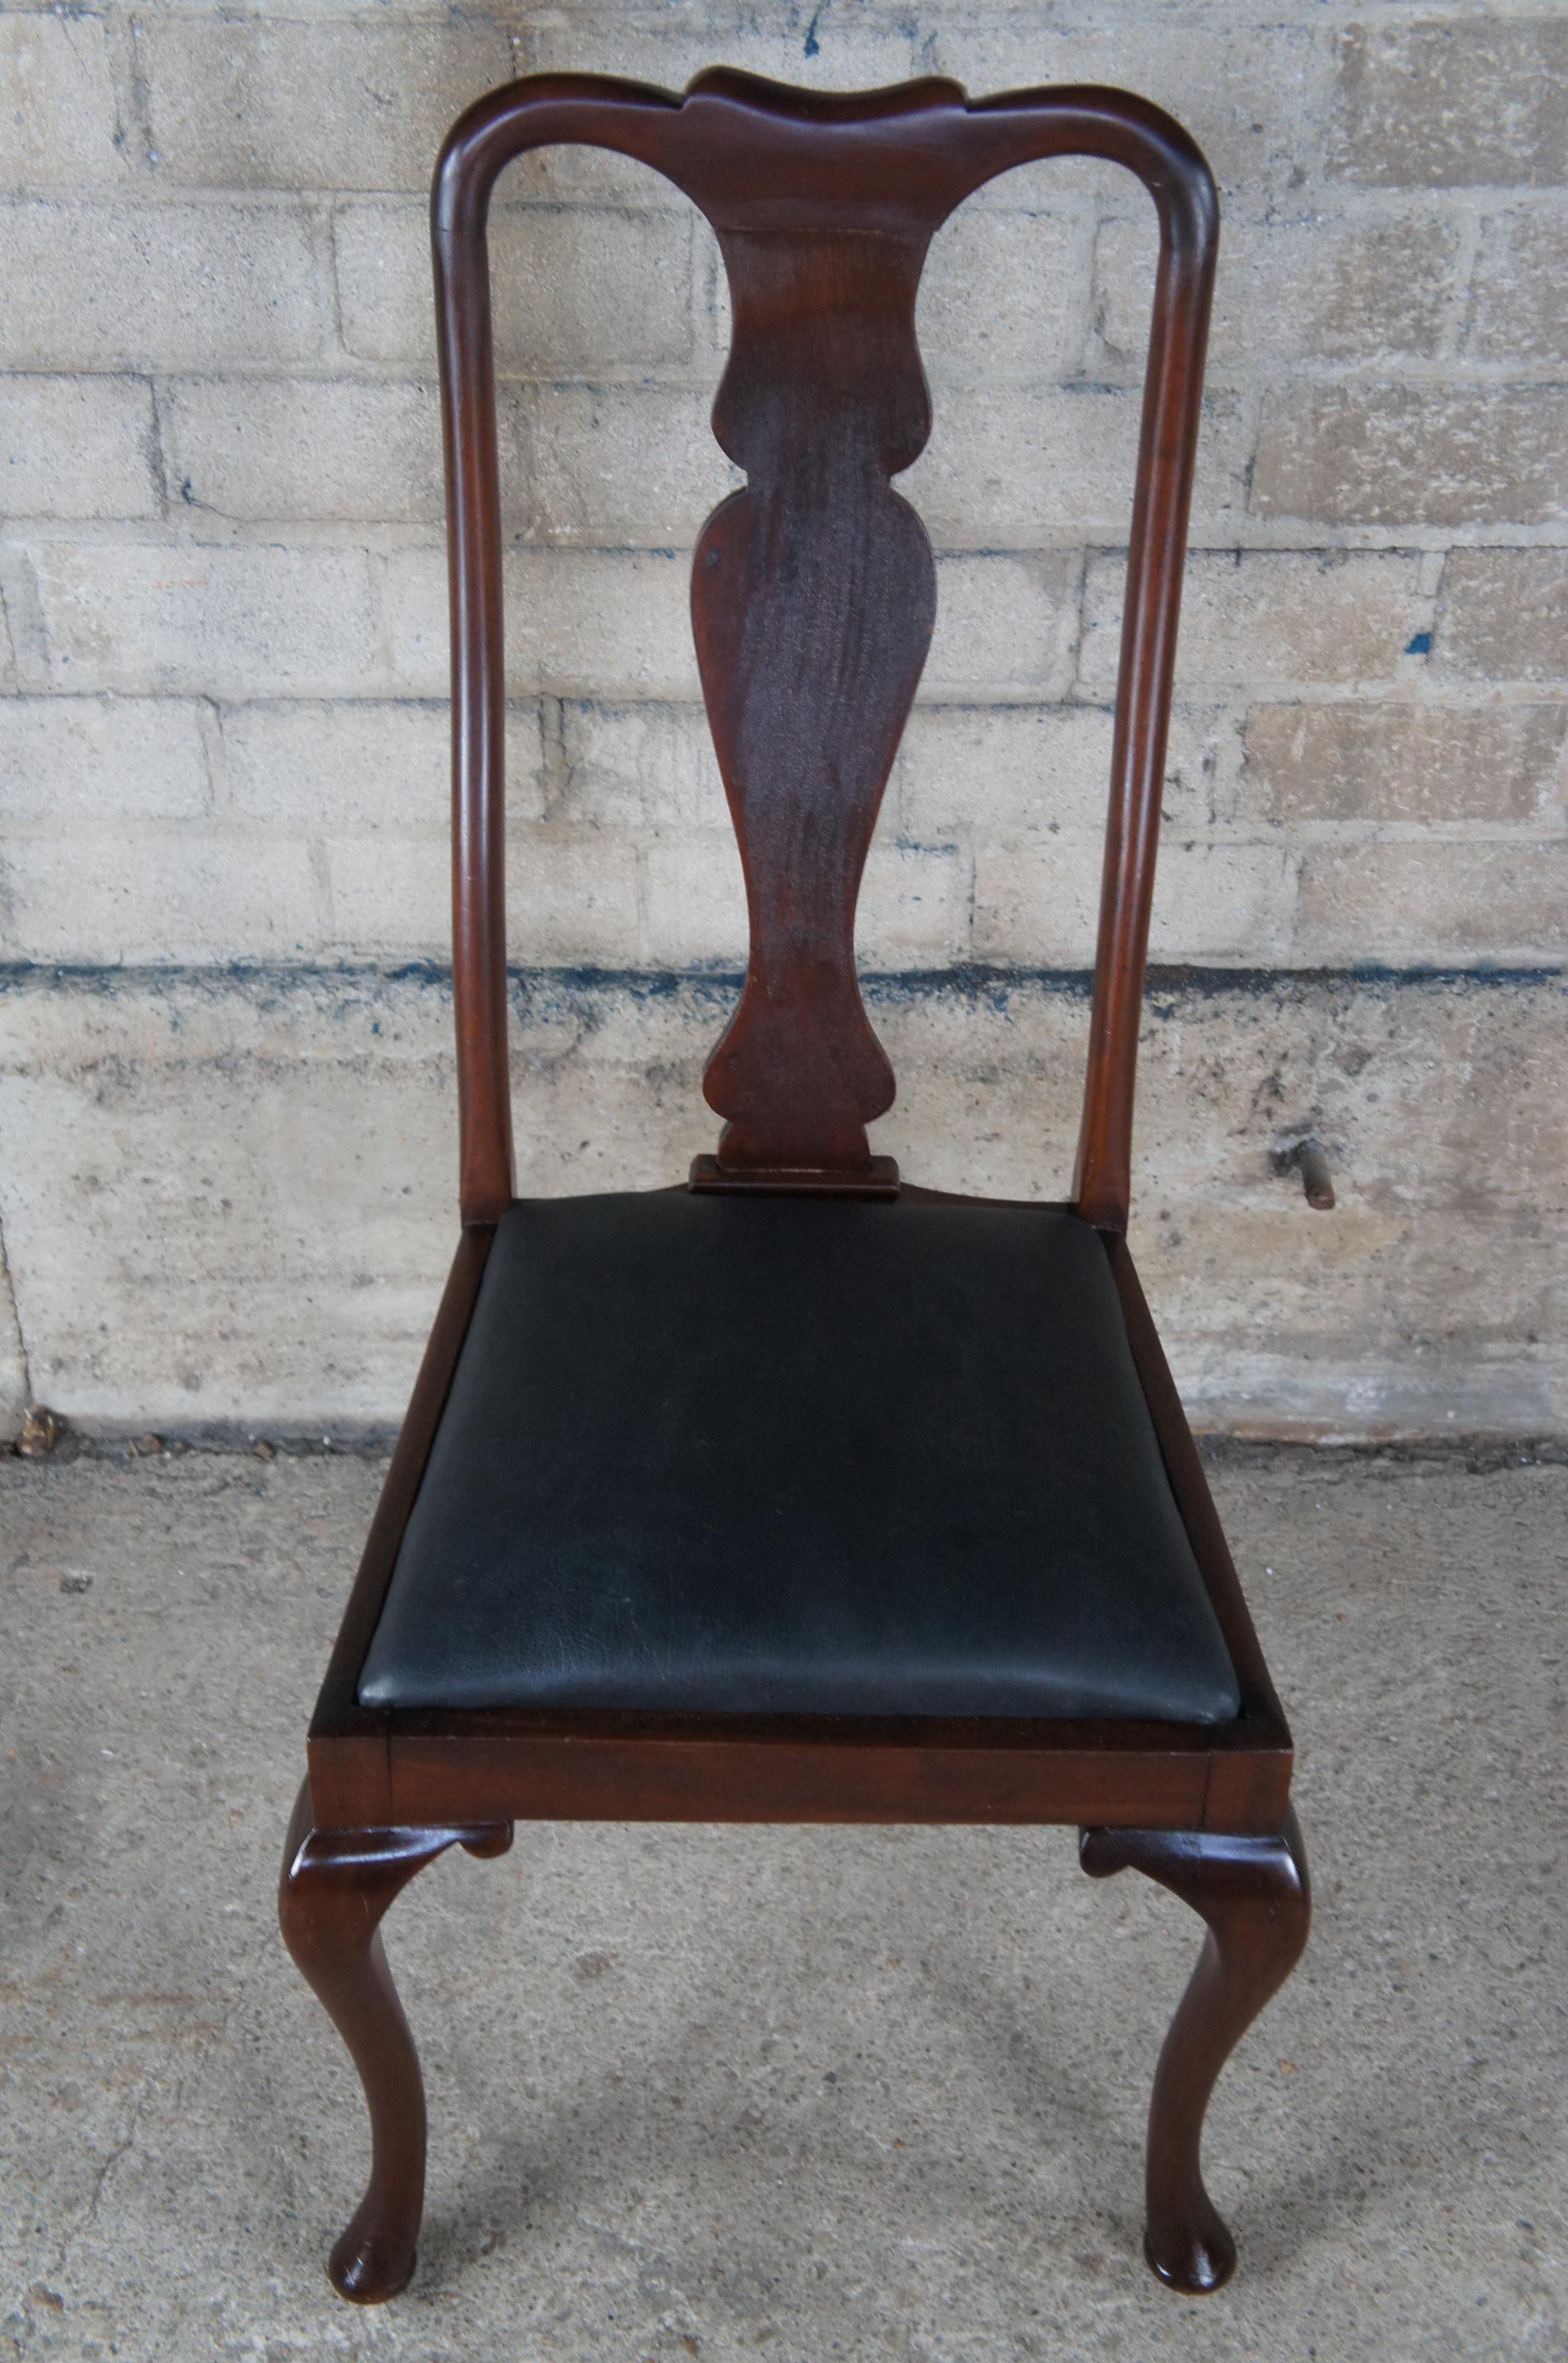 20th Century Antique Queen Anne Mahogany Black Deerskin Leather High Back Dining Desk Chair  For Sale